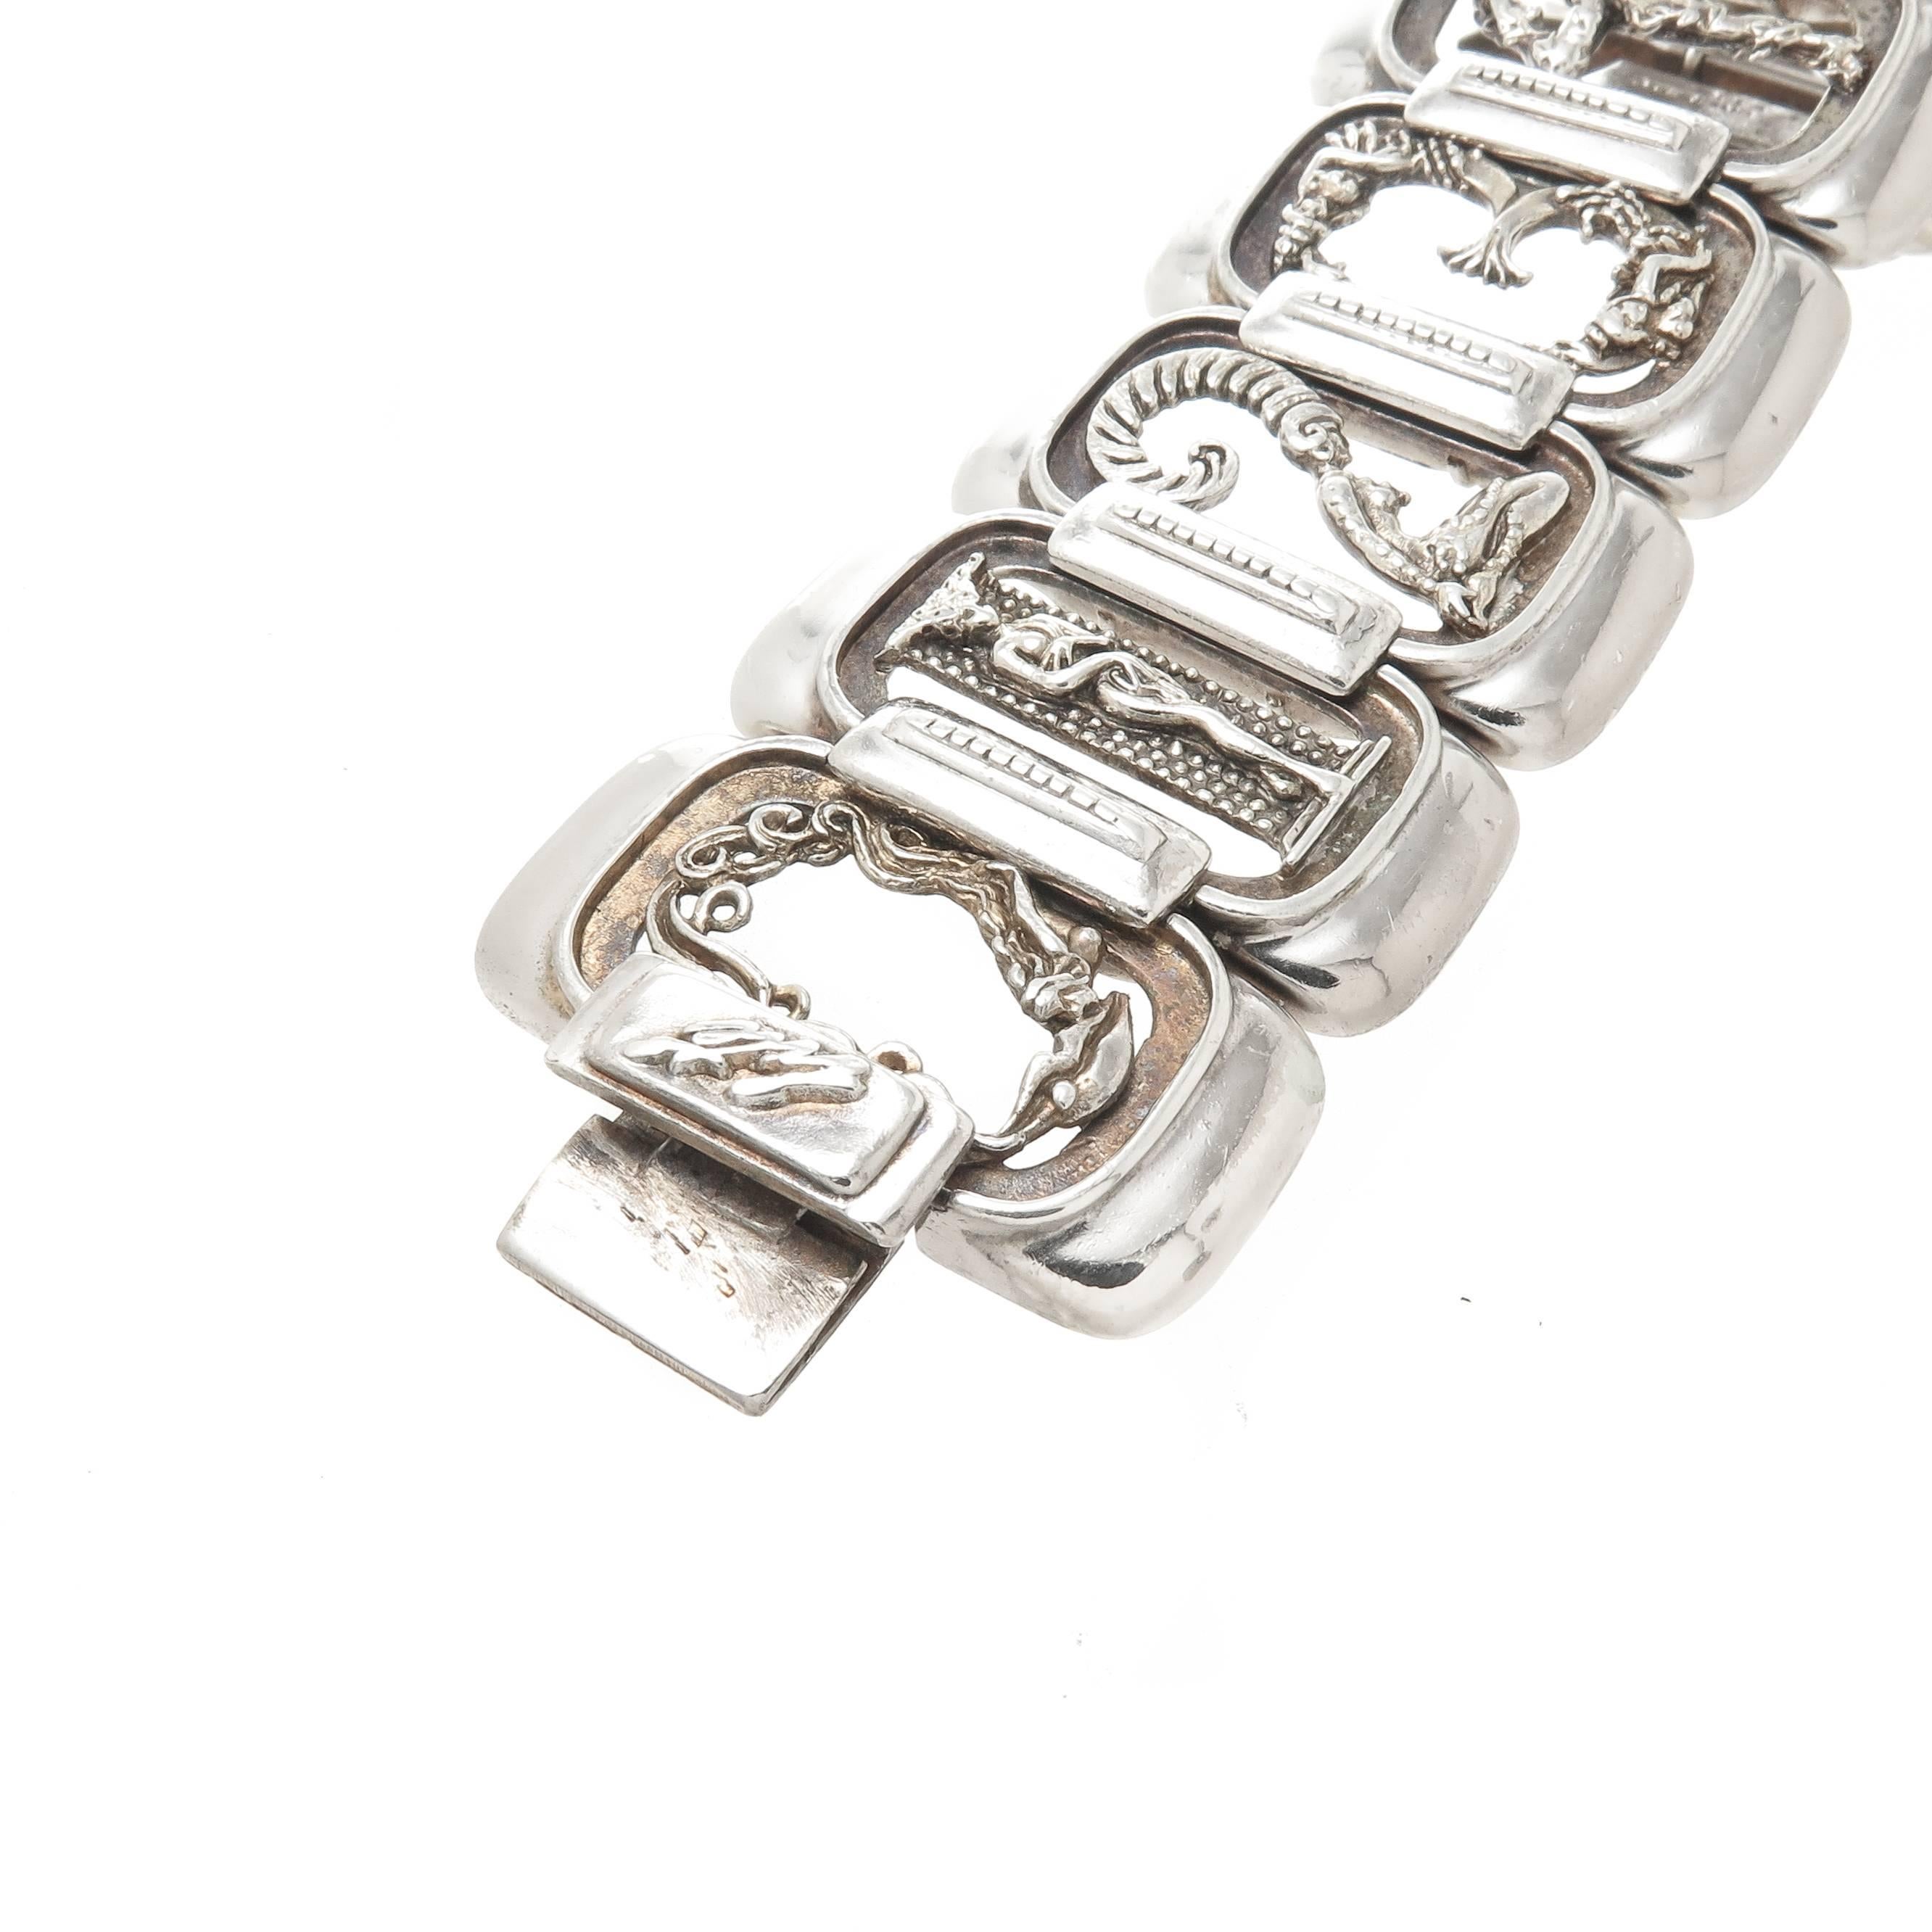 Circa 1980s Erte Sterling Silver Numbers Suite Bracelet, measuring 7 1/2 inch in length and 1 3/8 inch wide. Signed, Numbered and also have the stamp of CFA Circle Fine Art Galleries. 